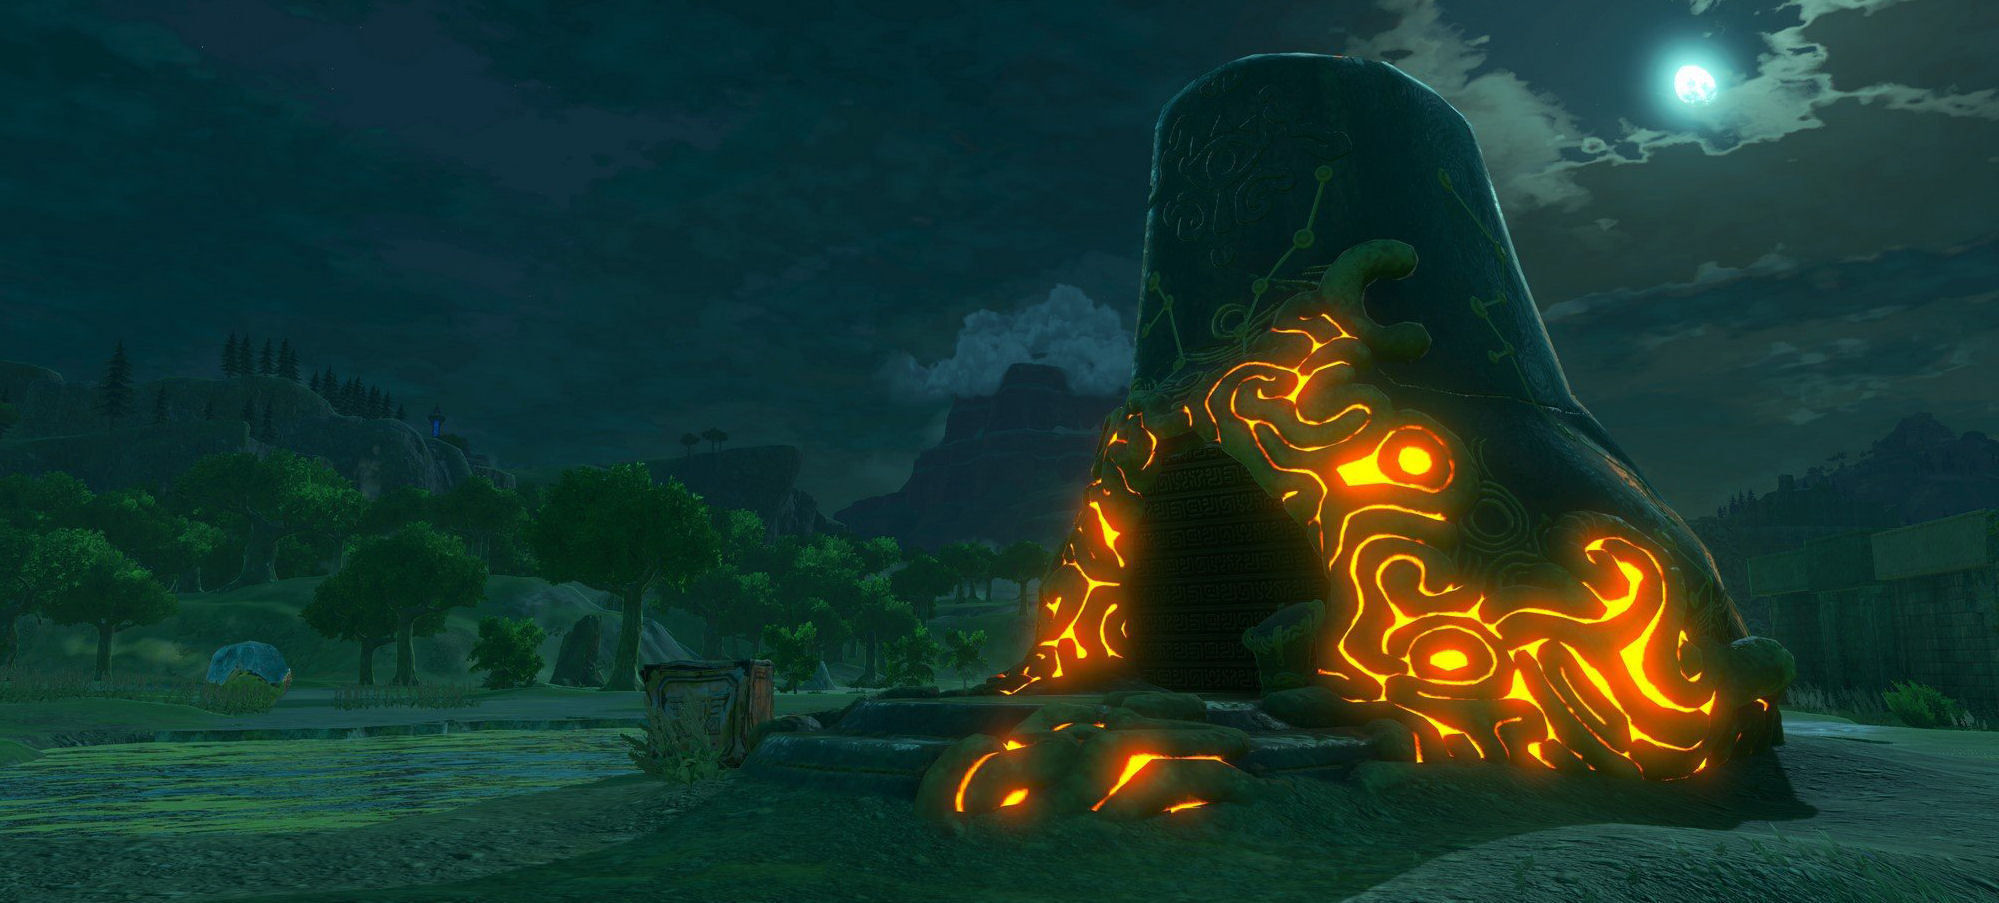 legend of the zelda breath of the wild shrine locations